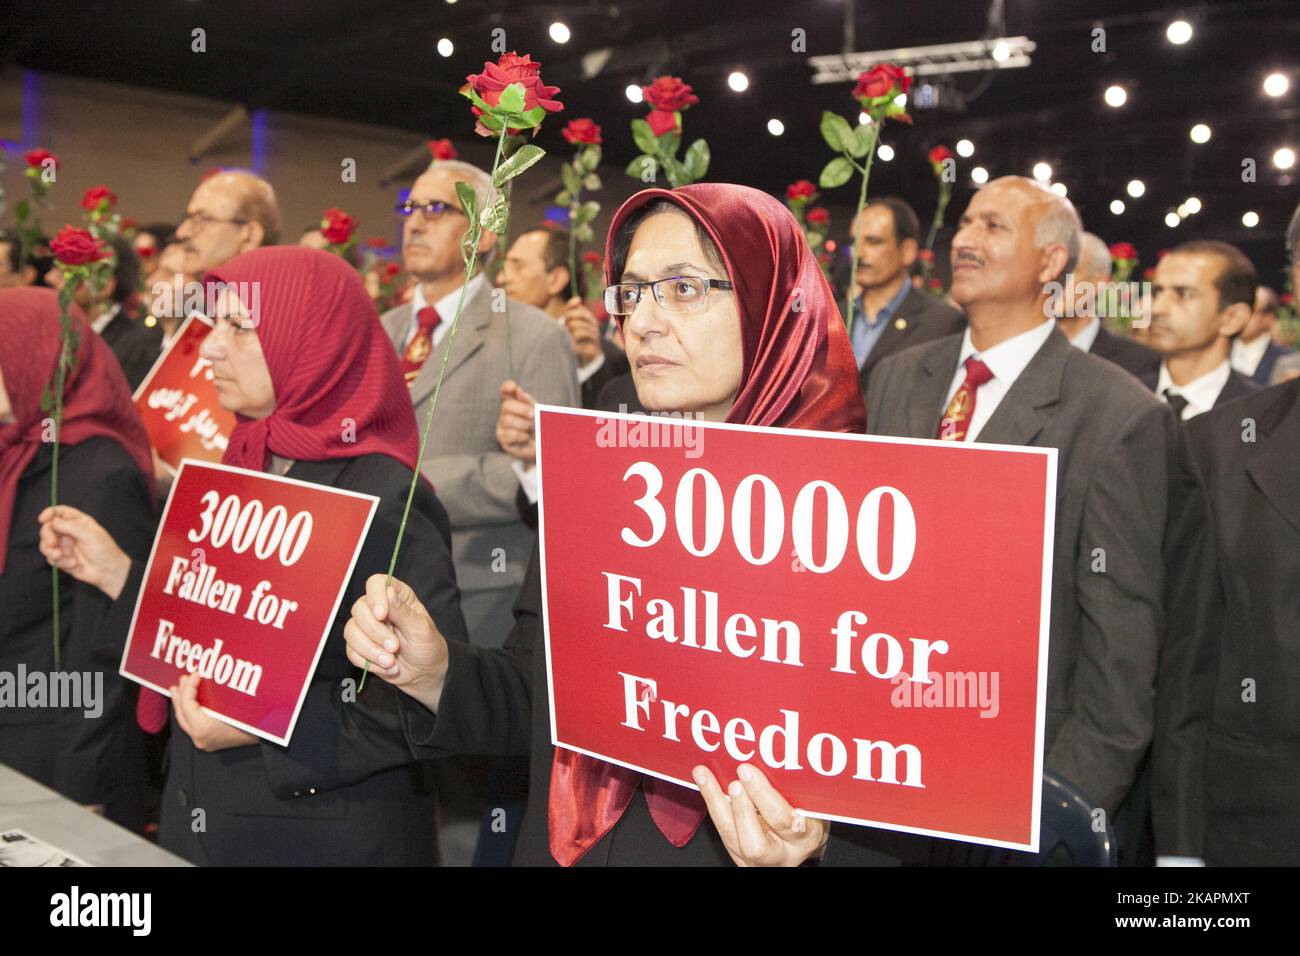 Conference on the anniversary of the massacre of 30,000 political prisoners in Iran on 1988 was held in Tirana, Albania on Saturday August ,19 2017. Many members of the People’s Mojahedin of Iran(PMOI/MEK) in Albania also participated in this conference. (Photo by Siavosh Hosseini/NurPhoto) Stock Photo